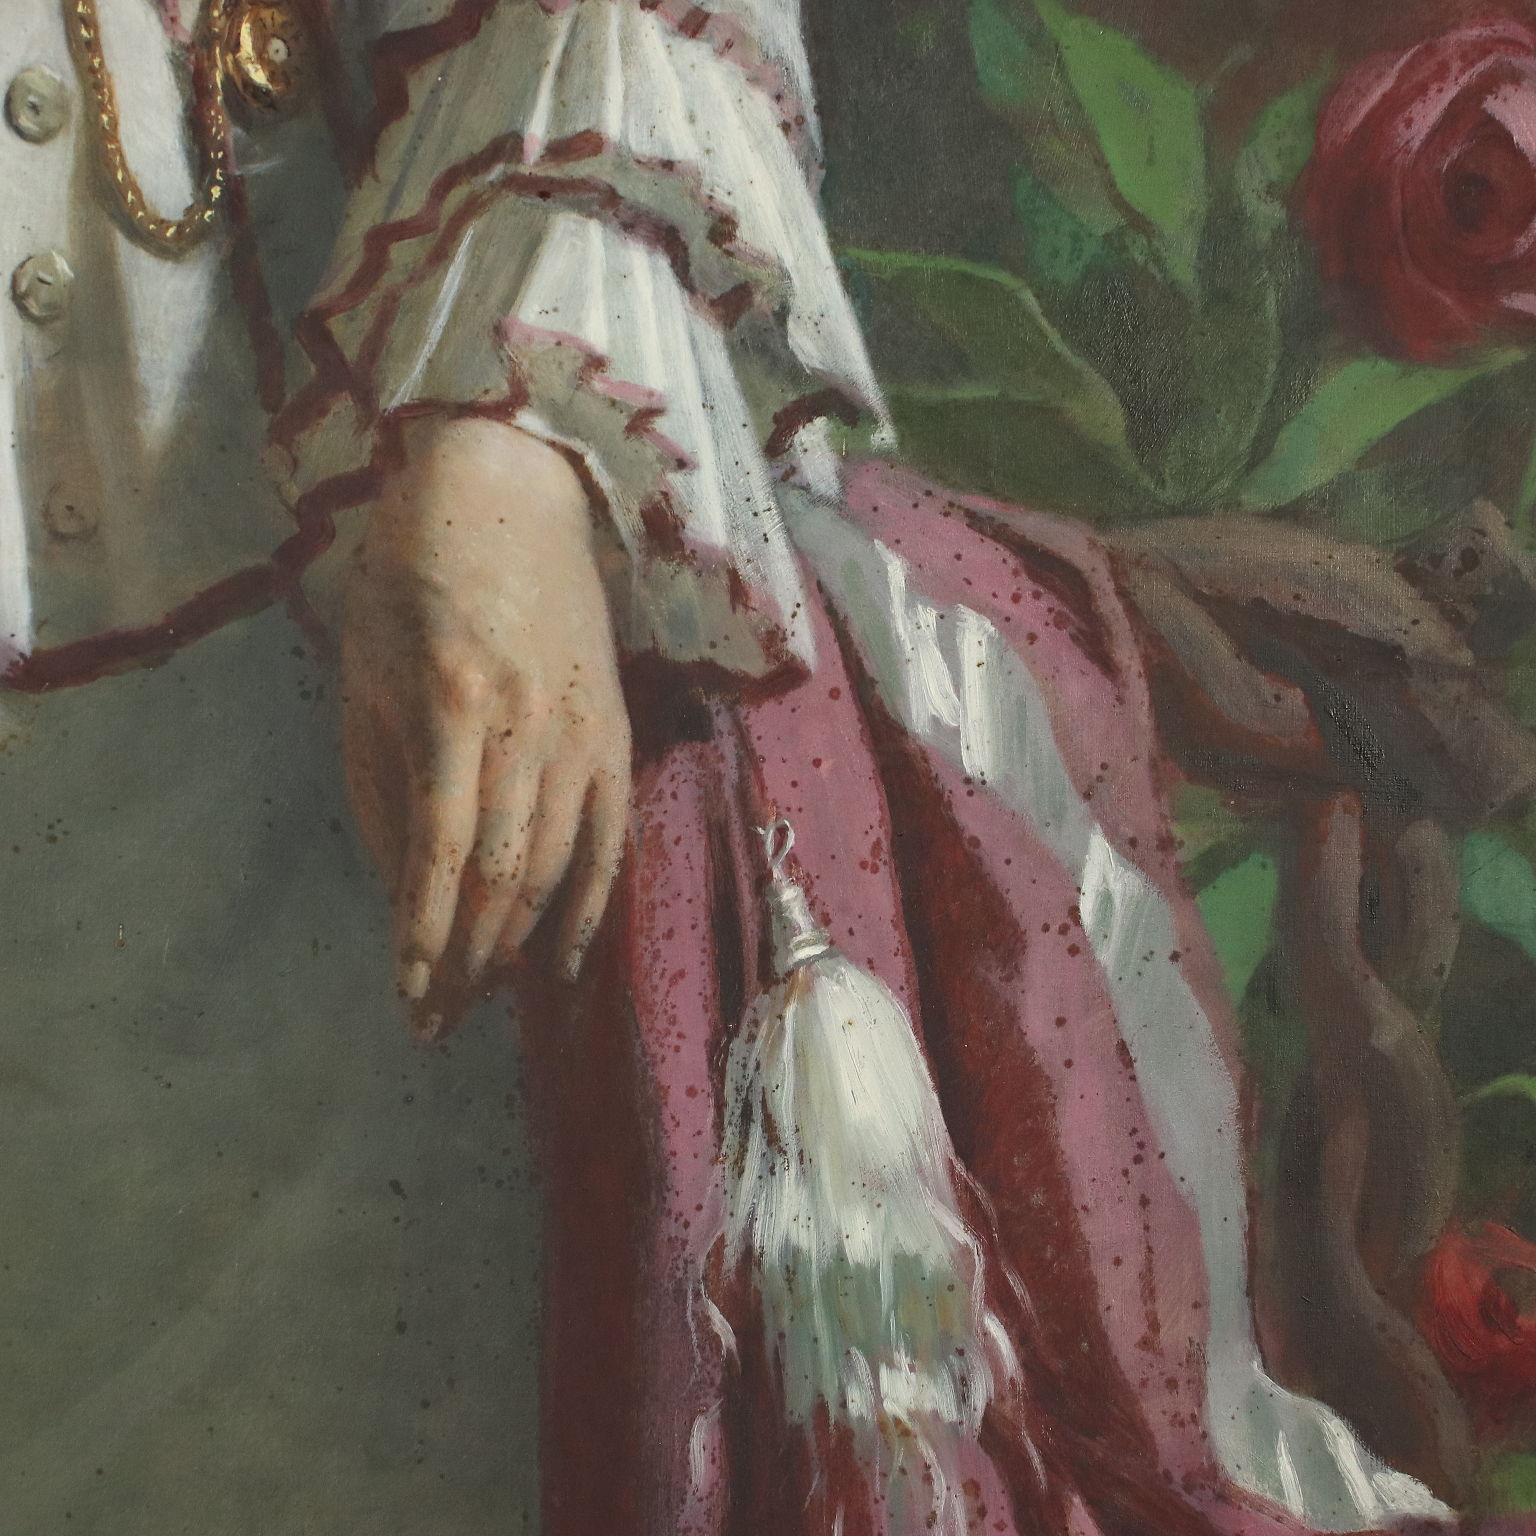 Oil on canvas. The young woman, elegantly dressed, is represented in life size standing in a garden, presumably the one of her noble residence.
The painting in fact comes from an important Lombard noble family, to which the girl belonged.
The